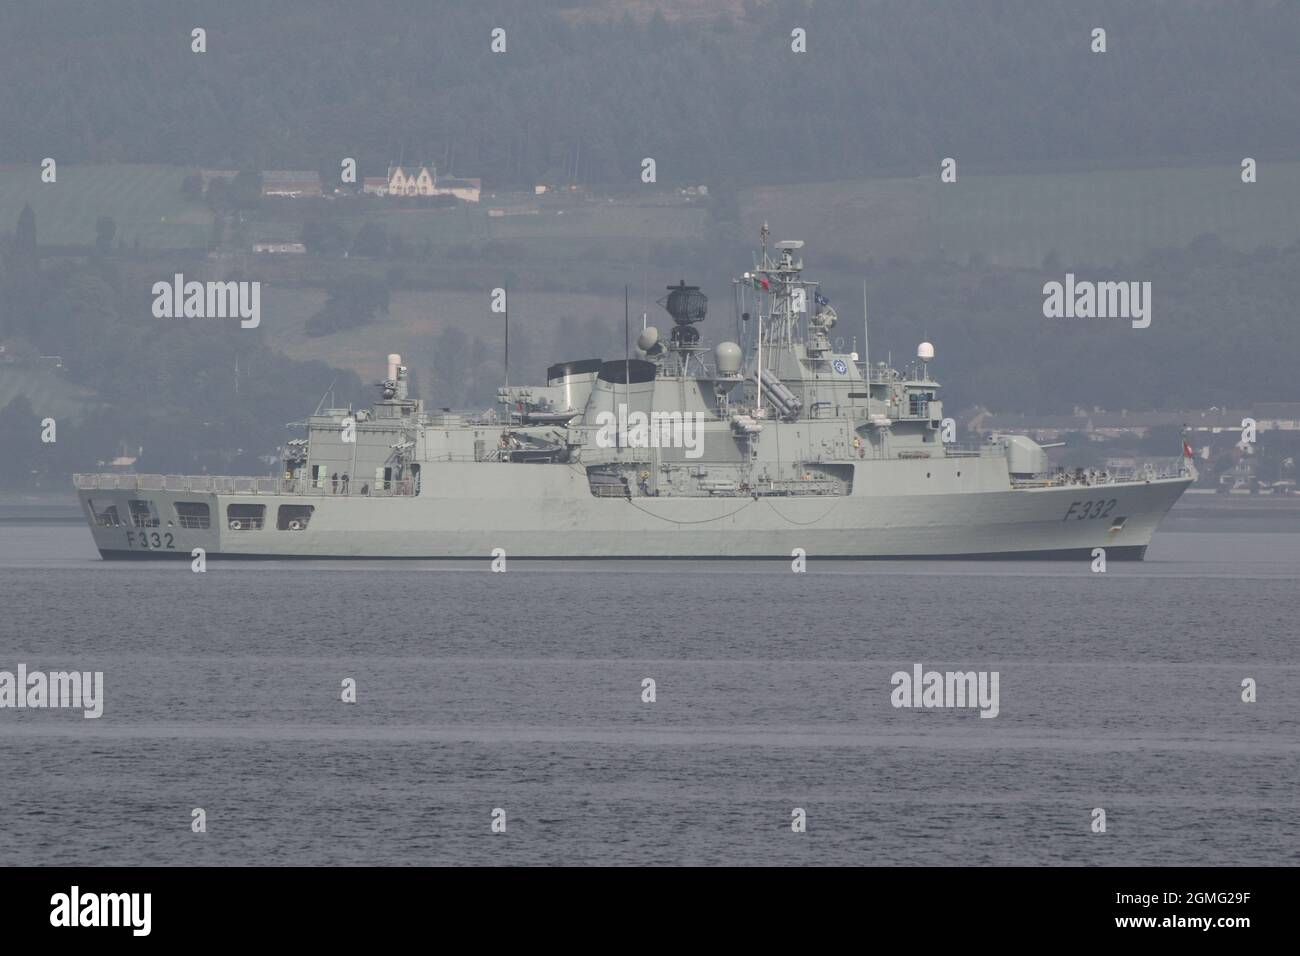 NRP Corte-Real (F332), a Vasco da Gama-class frigate operated by the Portuguese Navy, off Greenock prior to participating in the military exercises Dynamic Mariner 2021 and Joint Warrior 21-2. Stock Photo